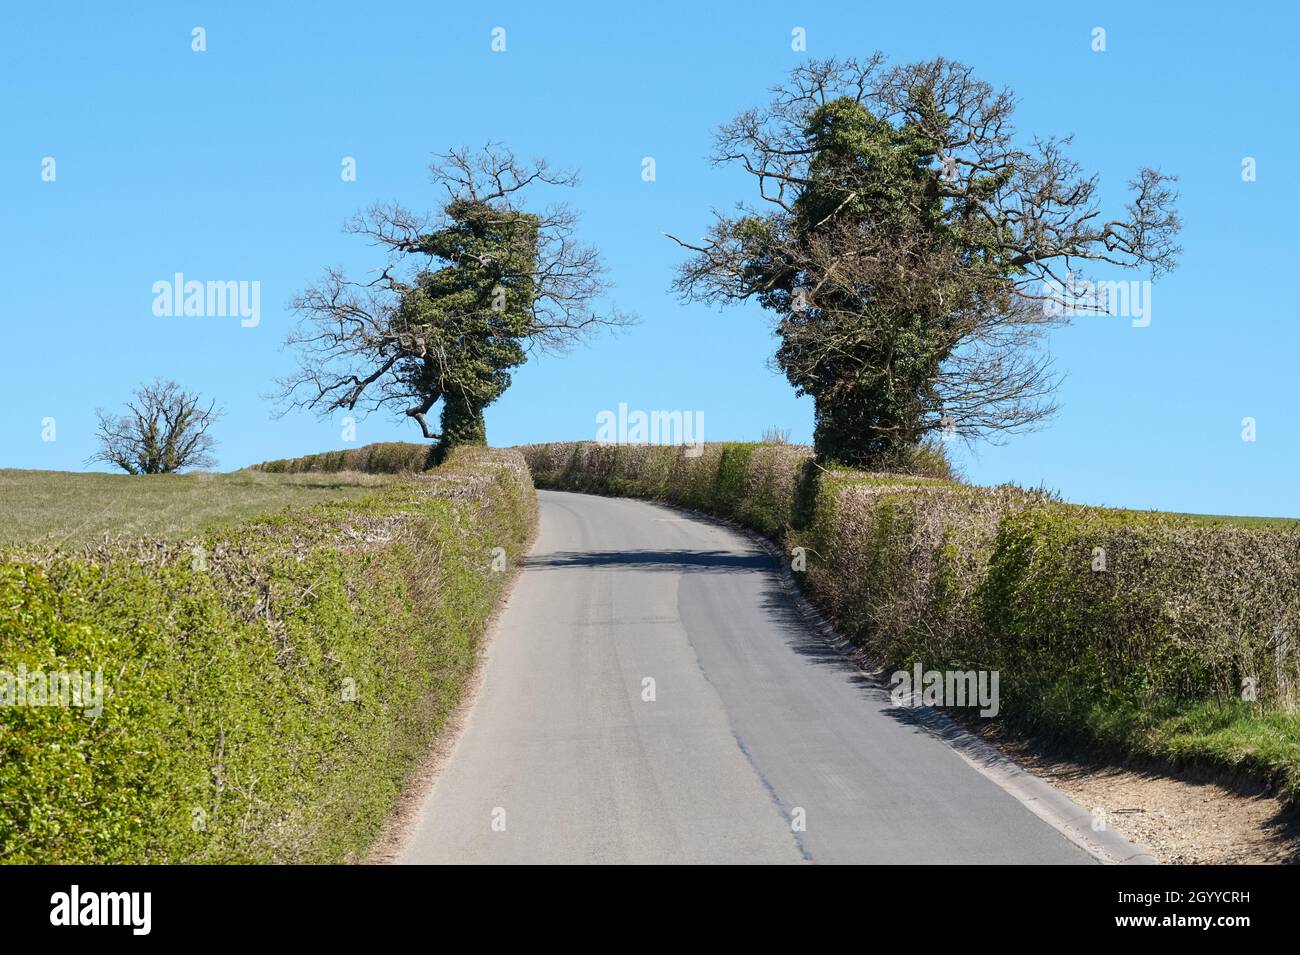 Narrow country road with hedges and trees on both sides in Hertfordshire England United Kingdom UK Stock Photo